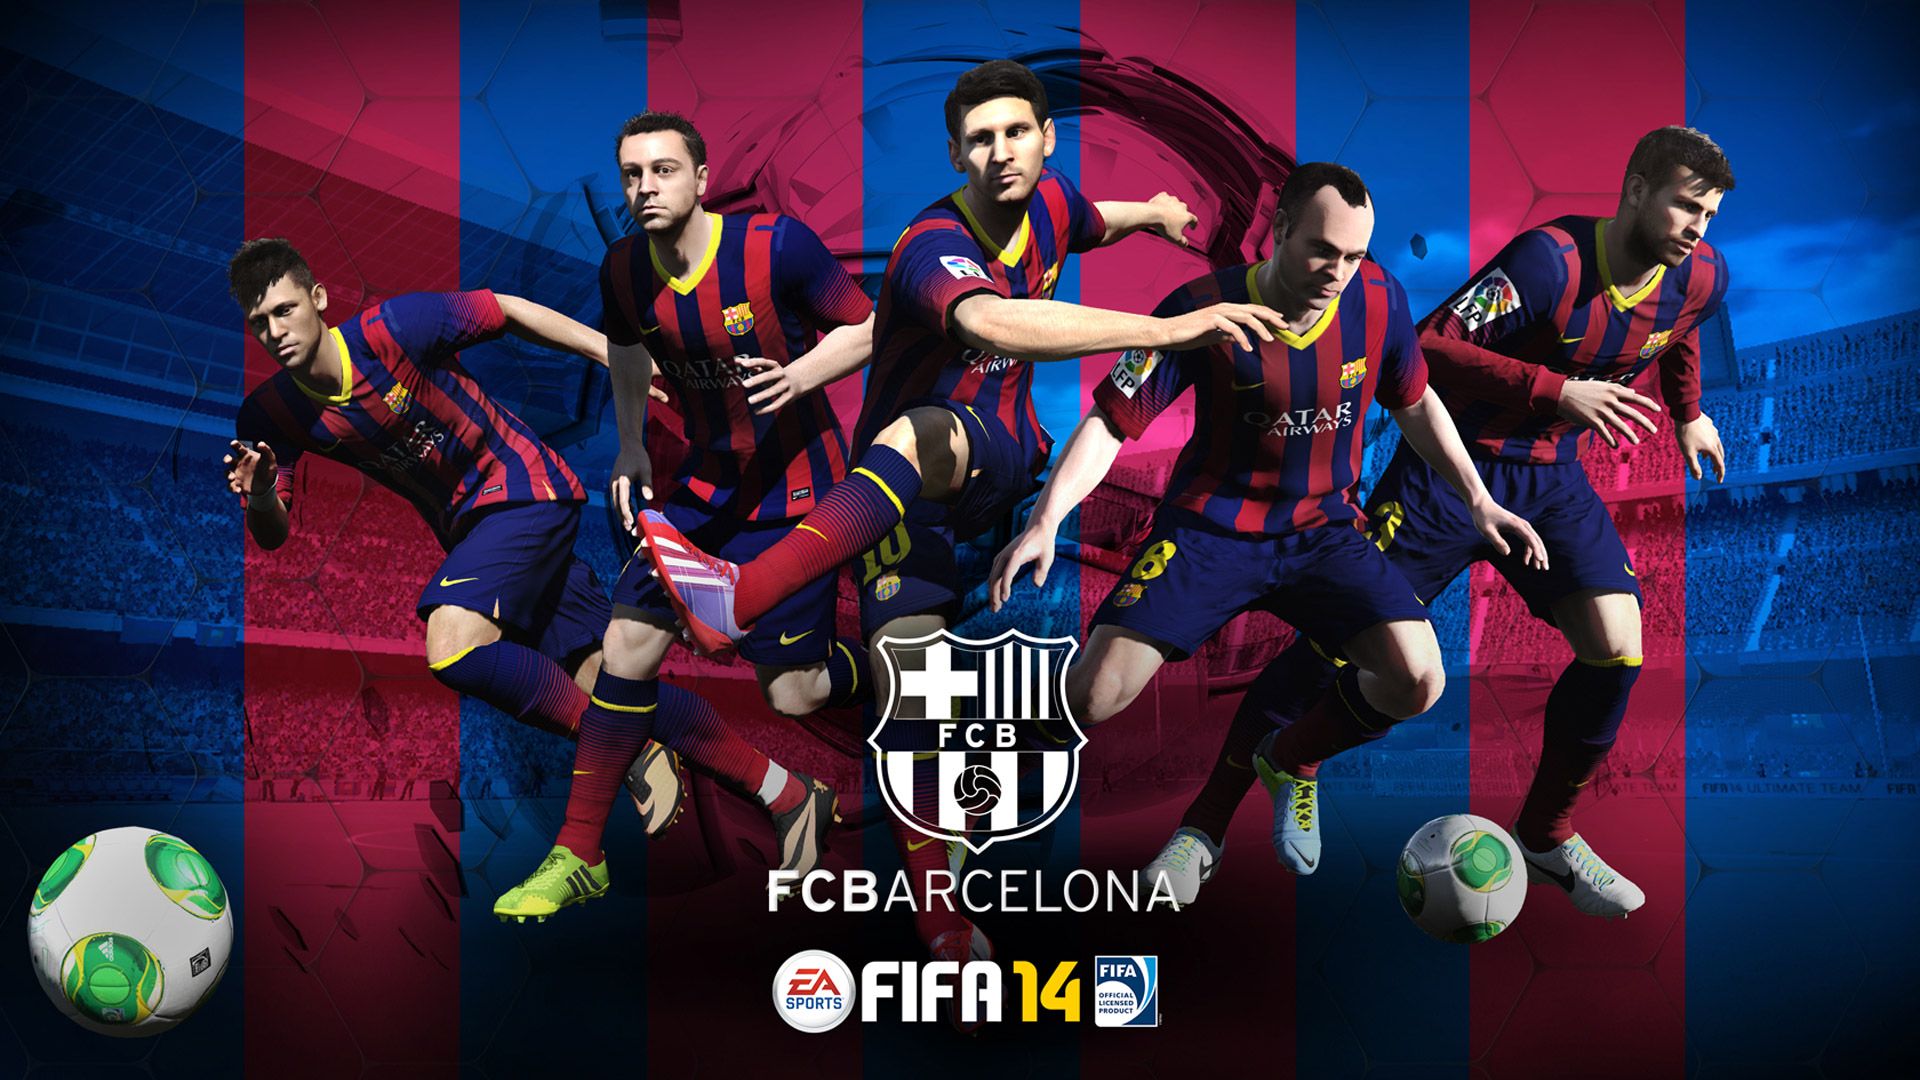 Fifa 2014 Game hd Wallpapers 1080p Widescreen Wallpapers High